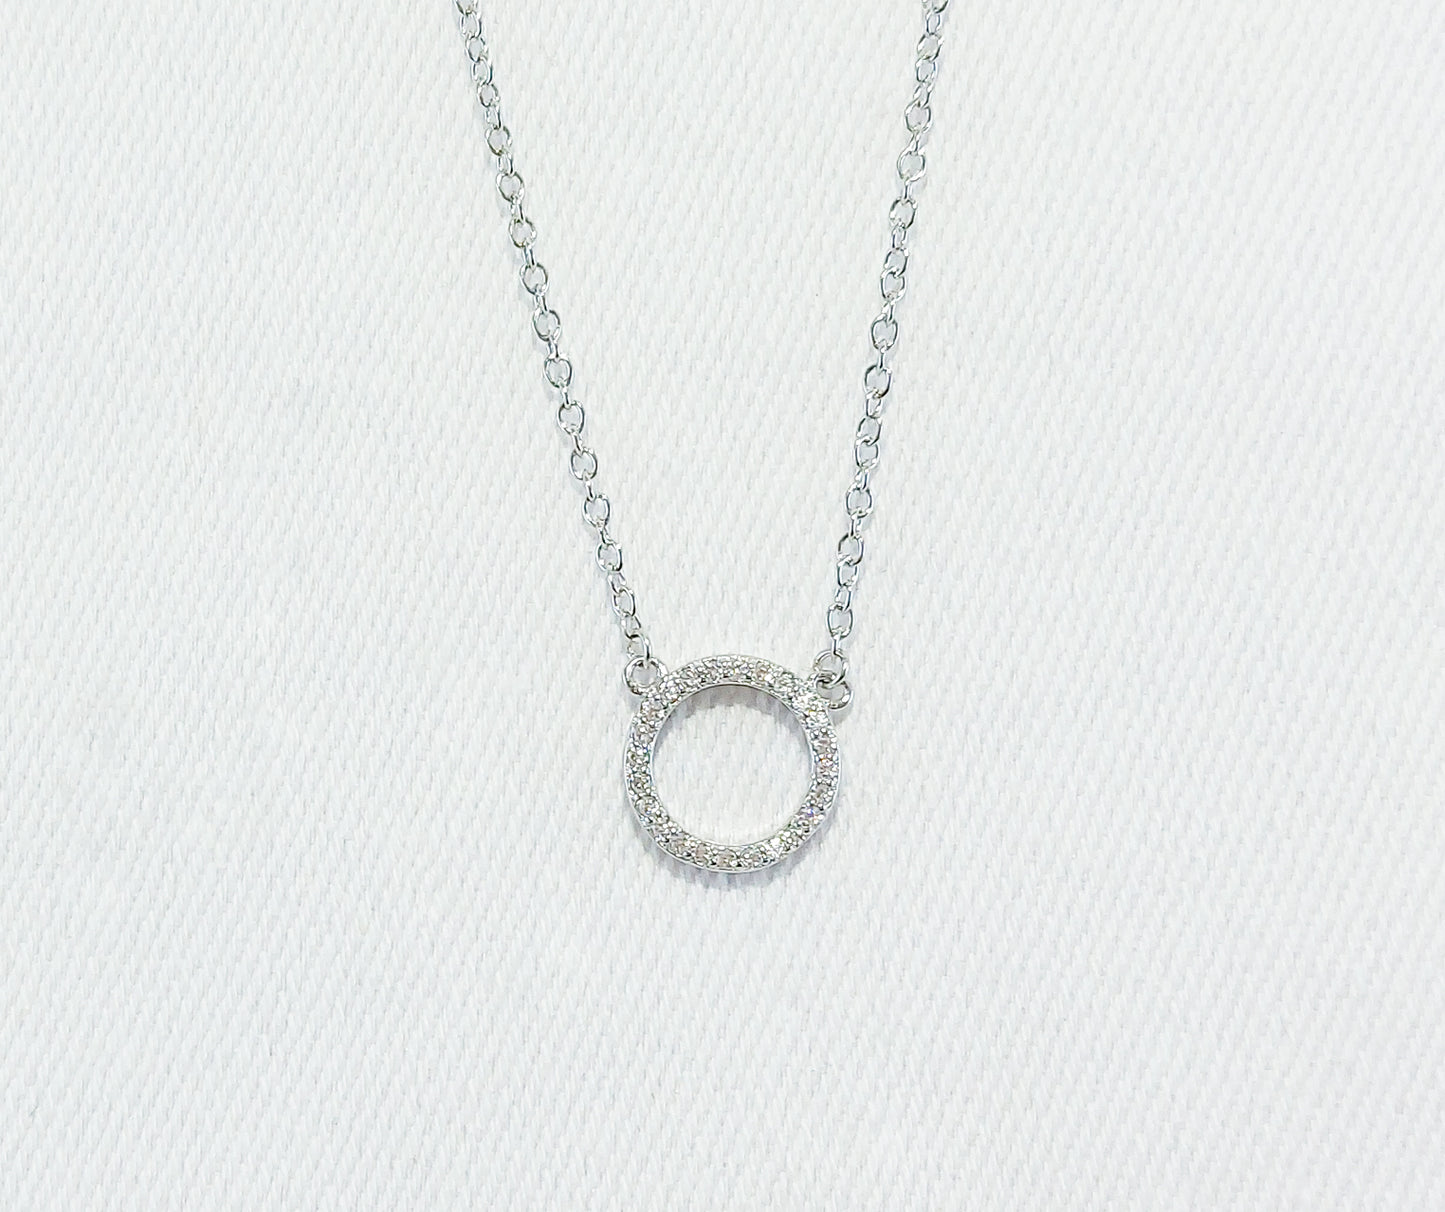 Sterling Silver Circle of Life Necklace. Cubic Zirconia Stones